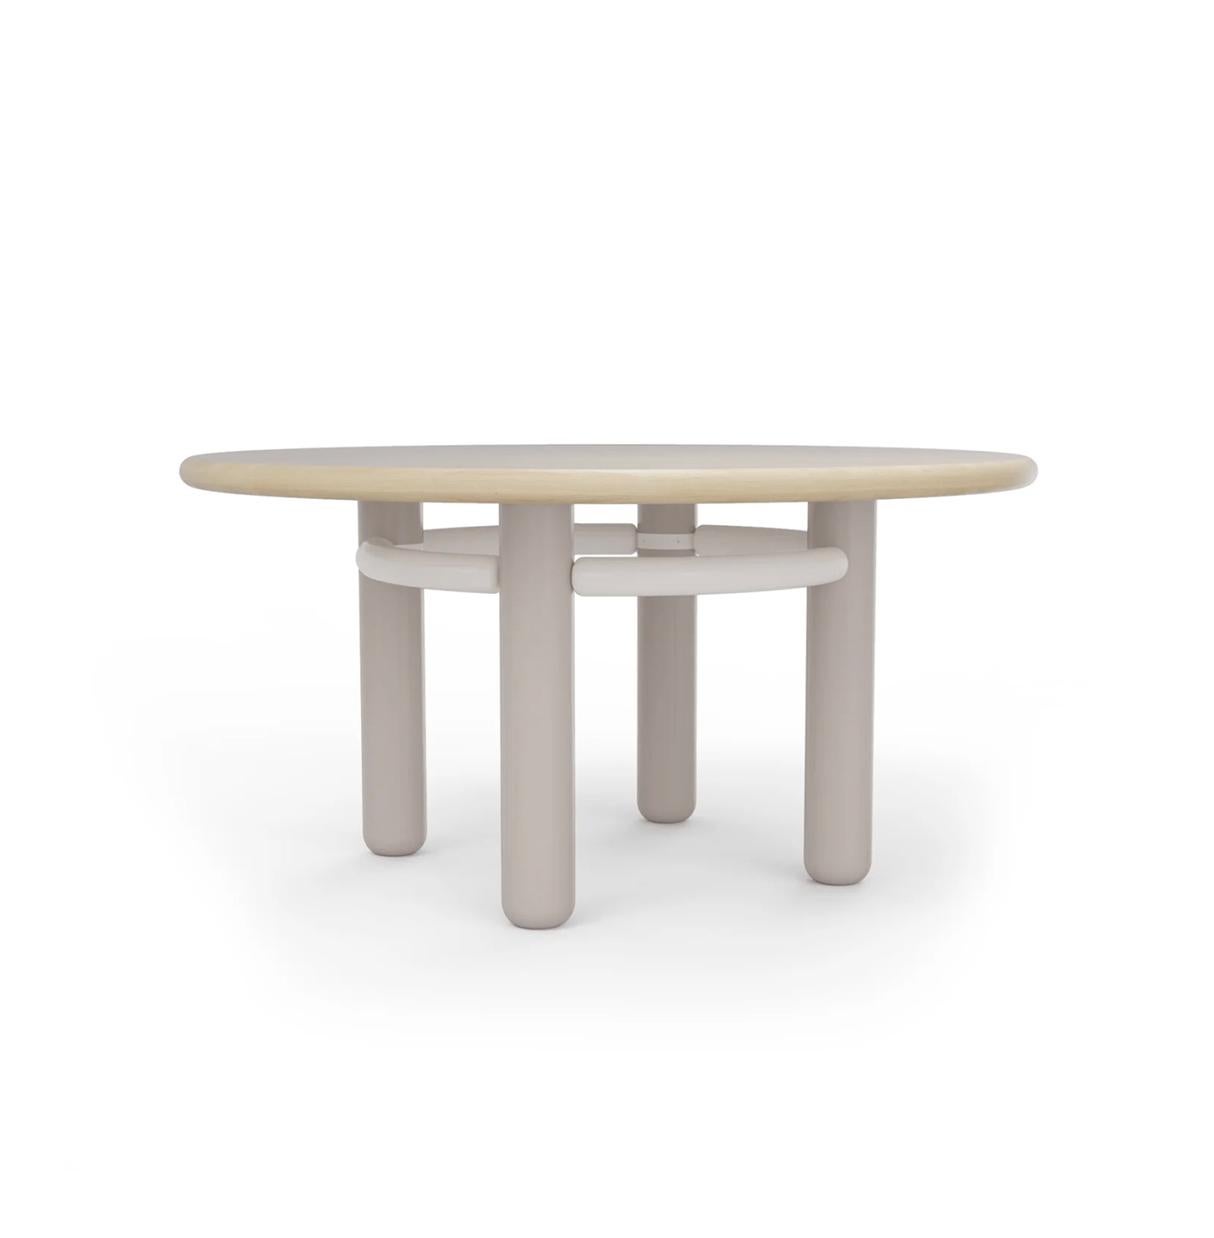 KAI dinner table with lacquered wood feet, oak wood top and steel structure
150cm diameter 
The feet, the structure and the top are available in a selection of curated materials and finishings from our collection. Completely customisable to each